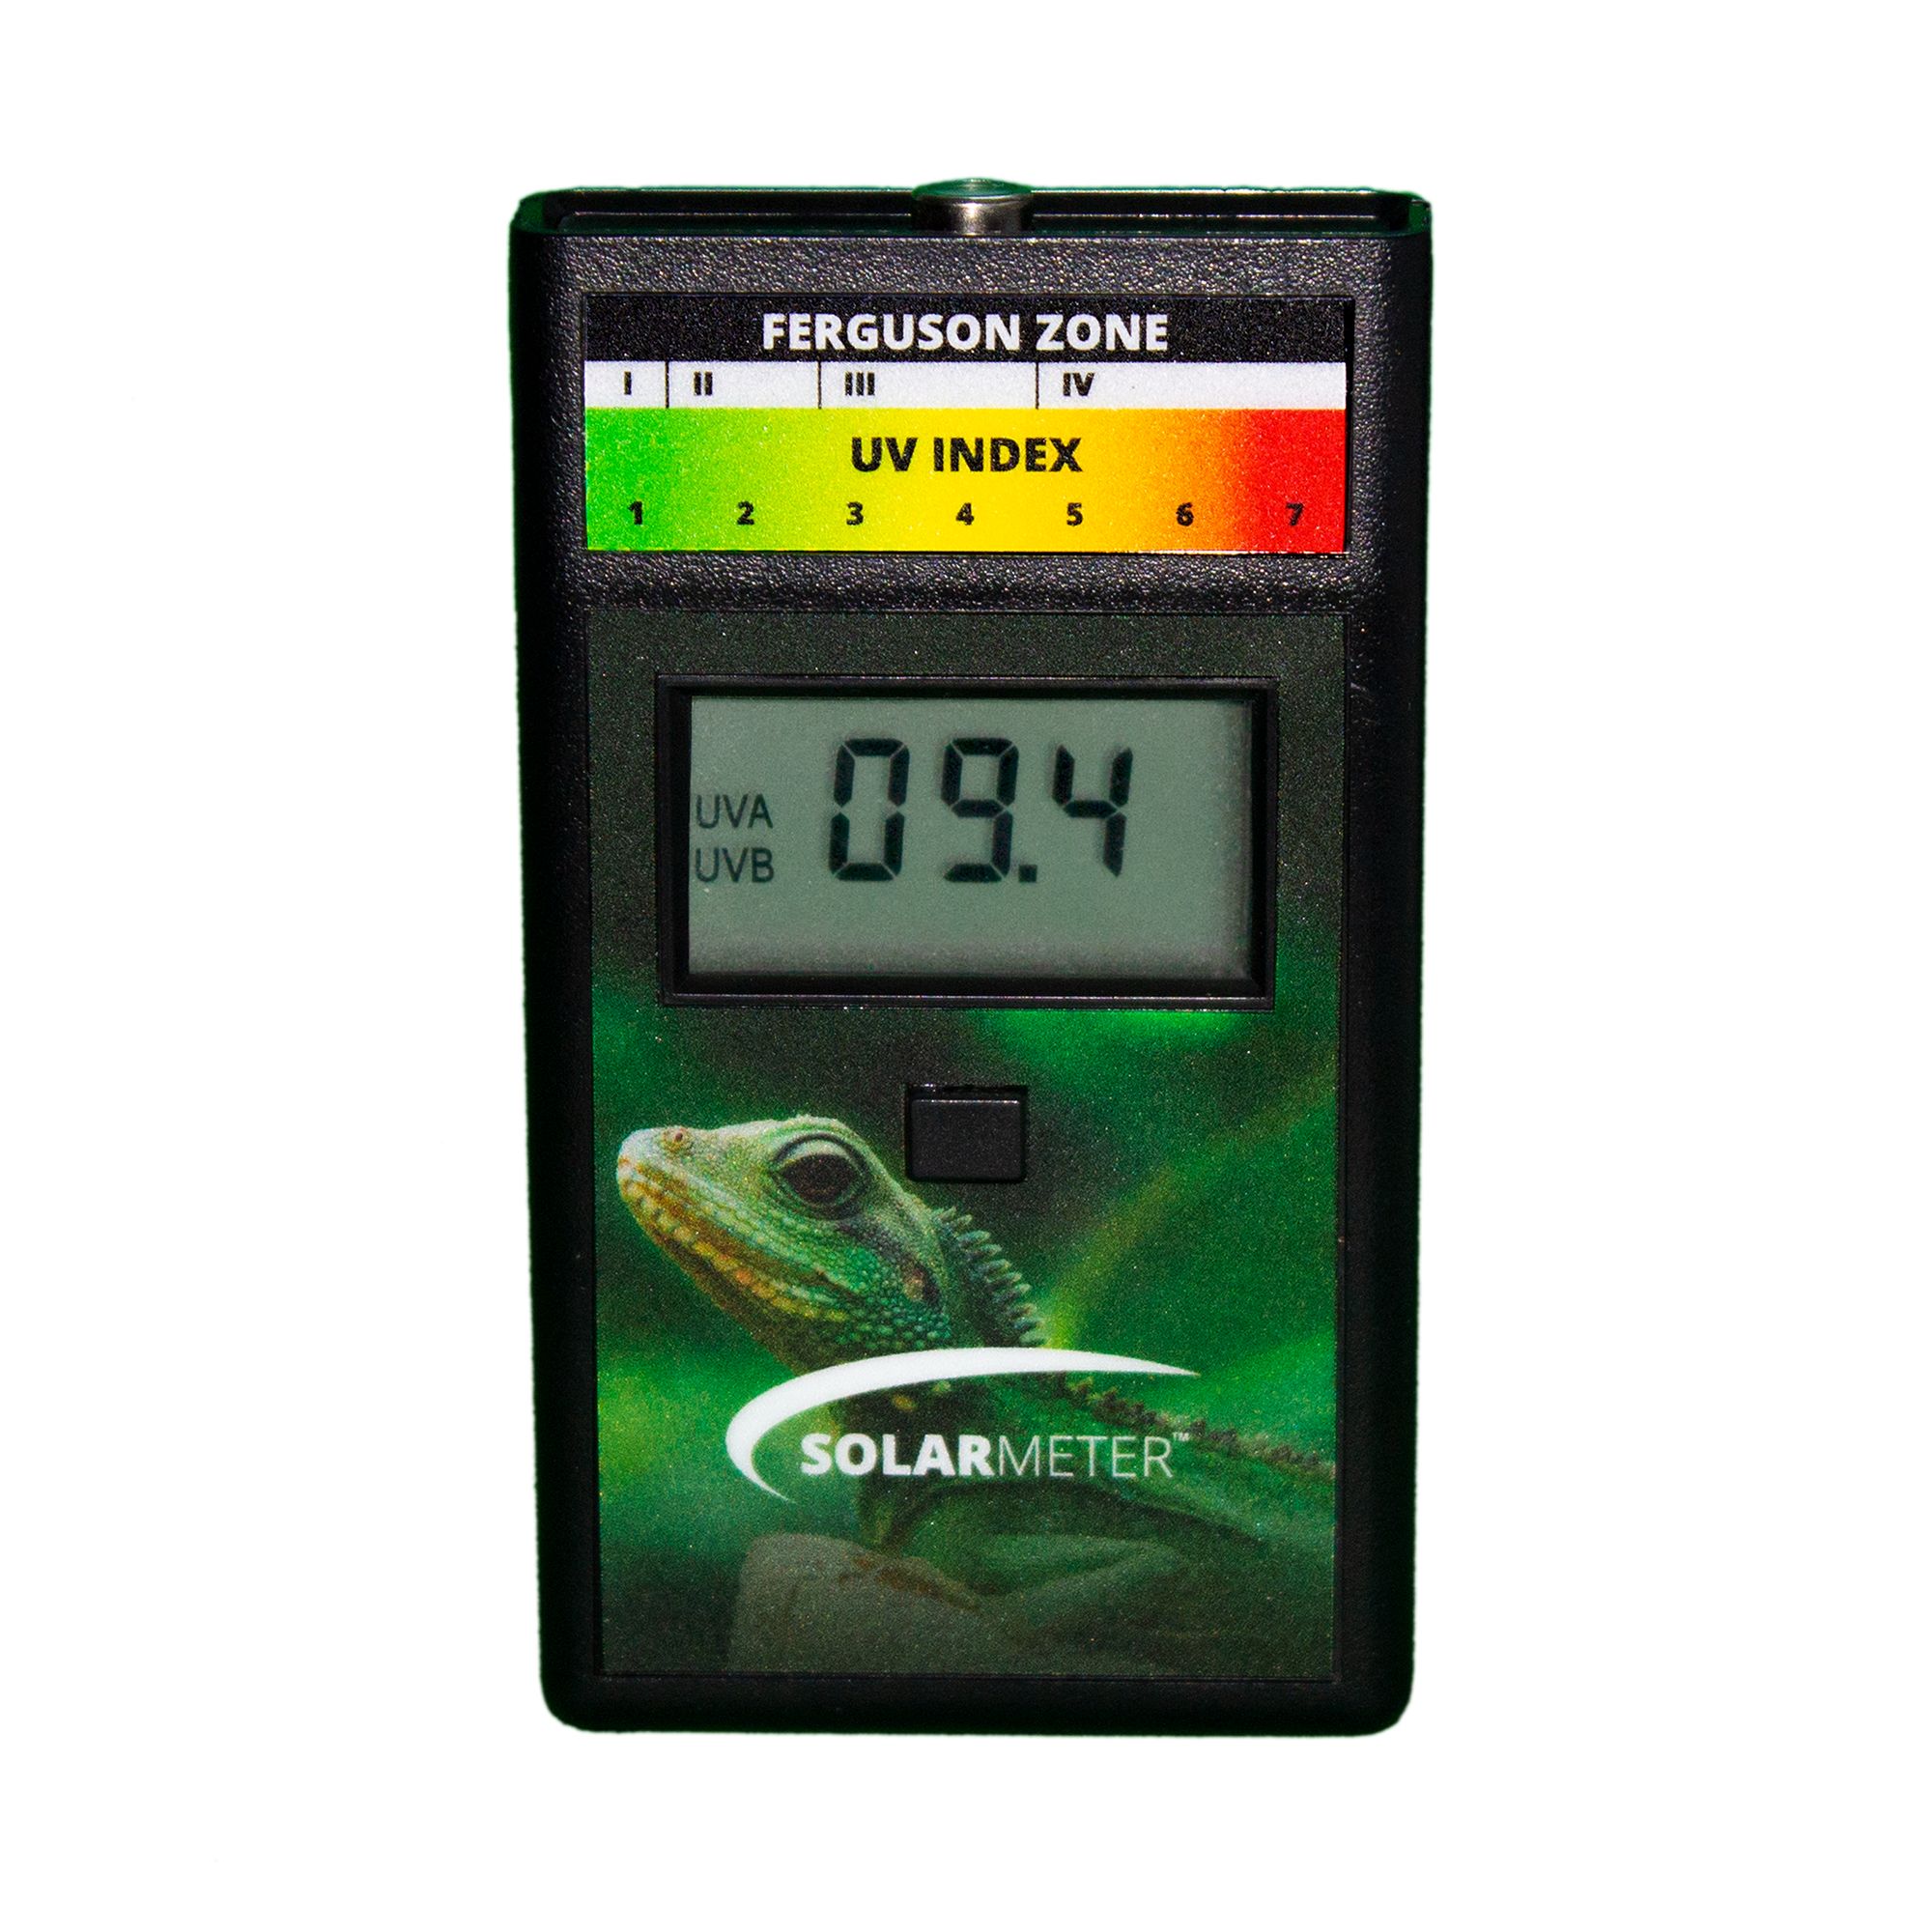 Thermometer World Digital Reptile Thermometer and Humidity Gauge Remote Probes - Terrarium Reptile Hygrometer Thermo Humidor Tank Cage Incubator B